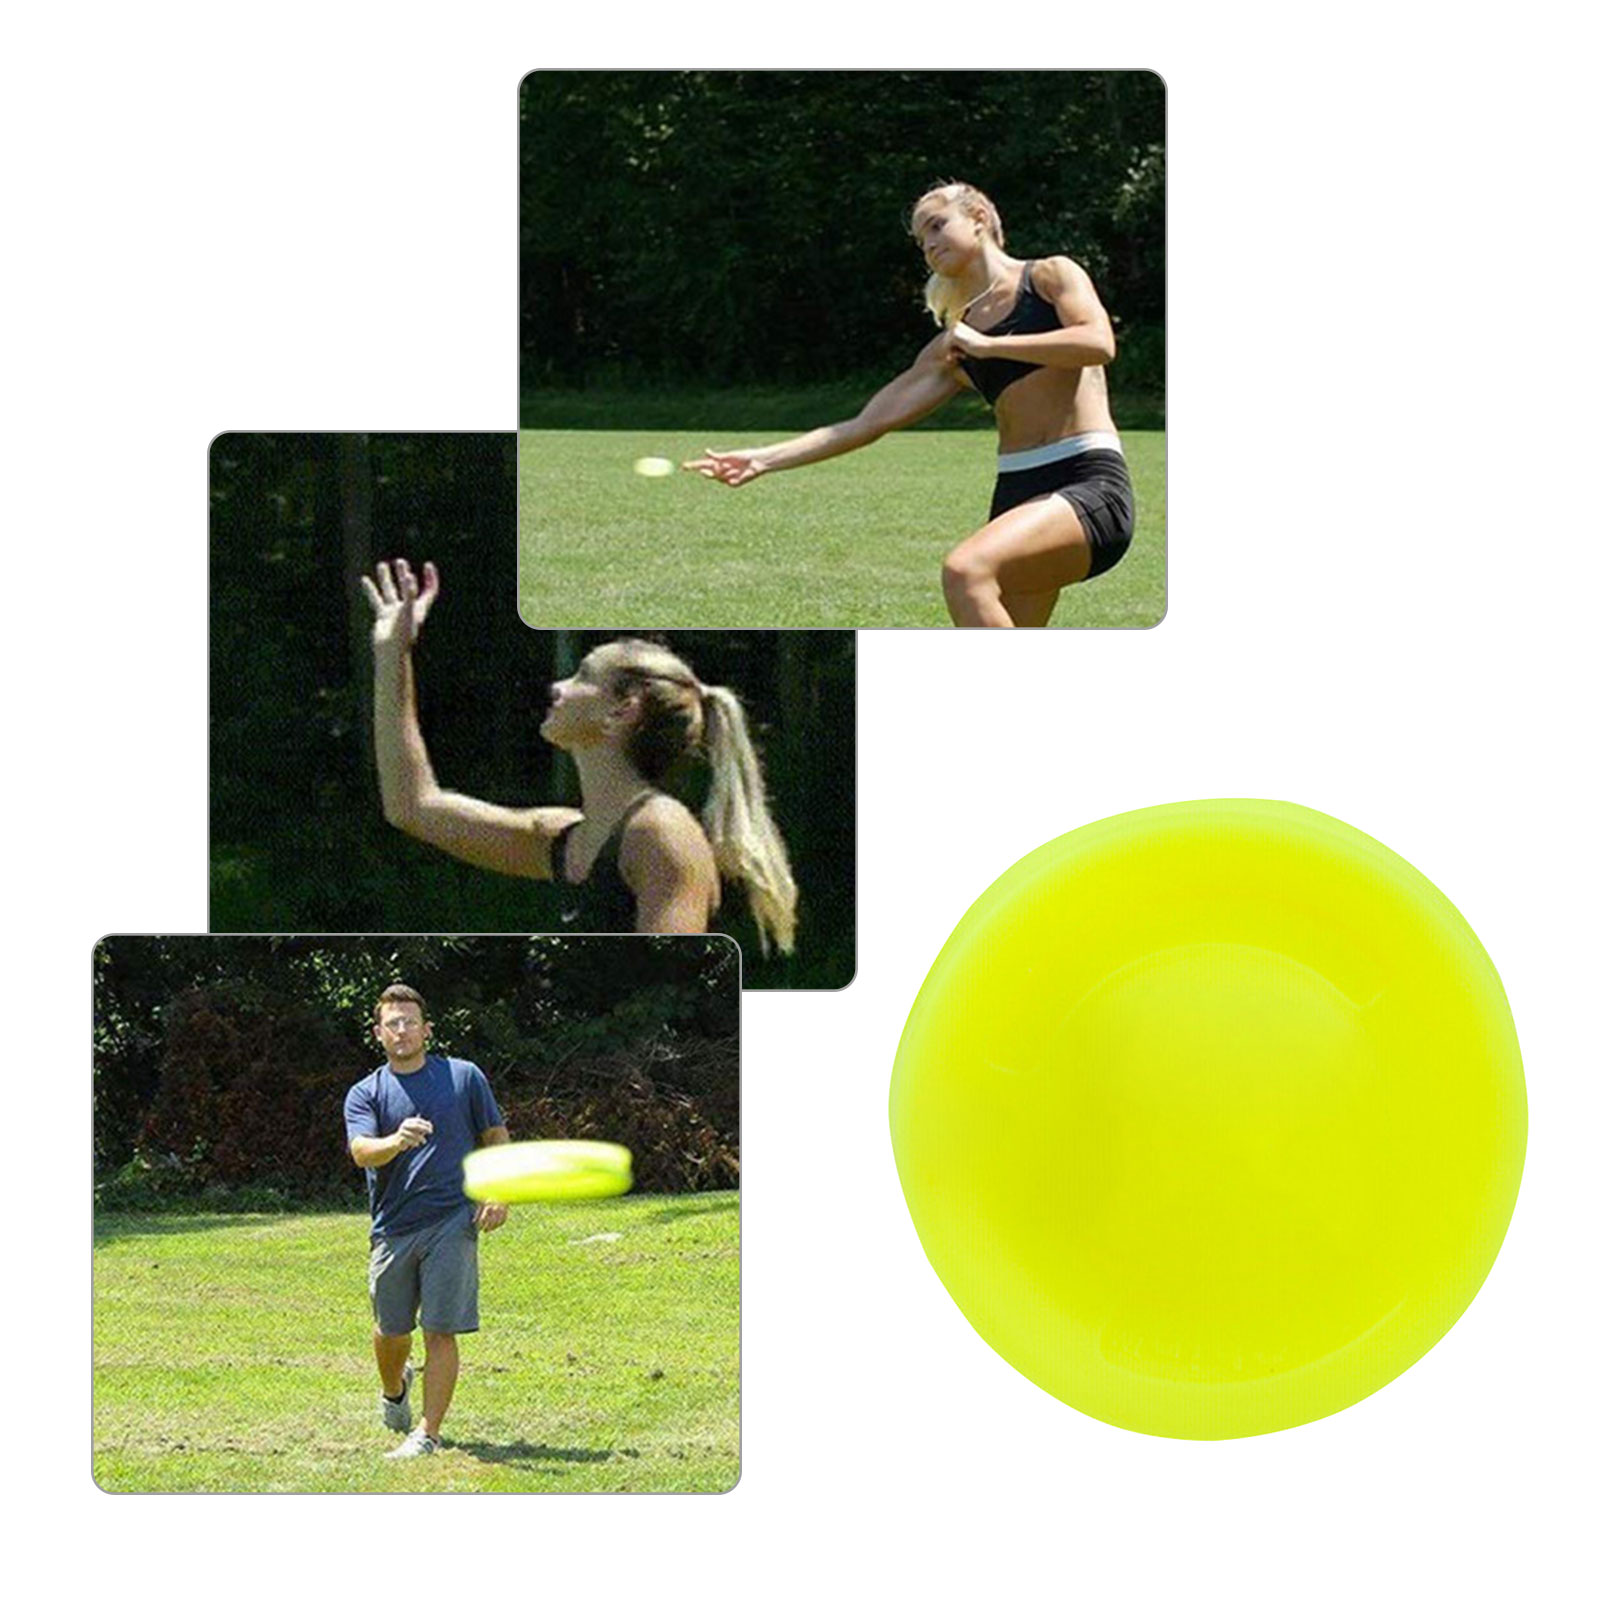 Mini Pocket Flexible New Spin Catching Game Flying Disc Outdoor Garden Beach 3PC 